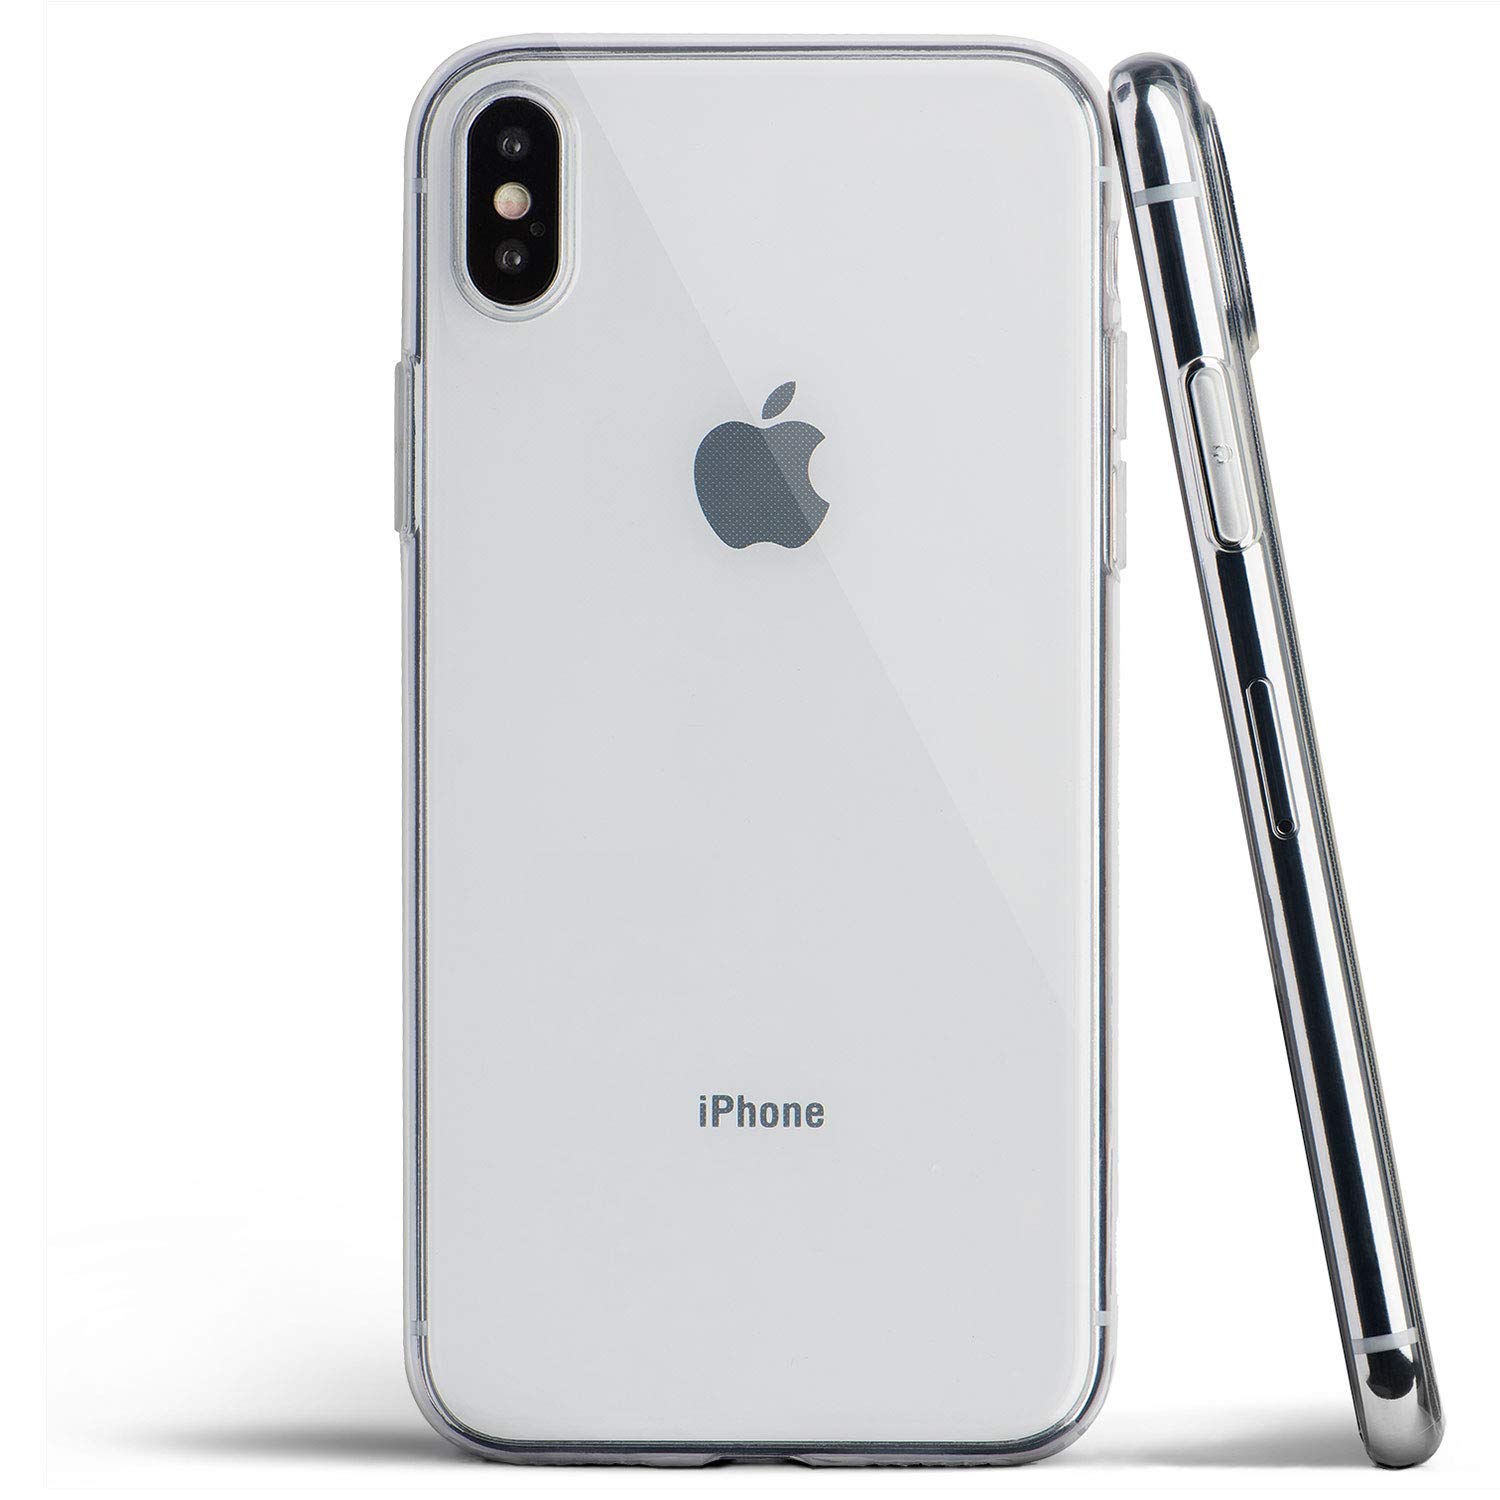 totallee thin clear iPhone case